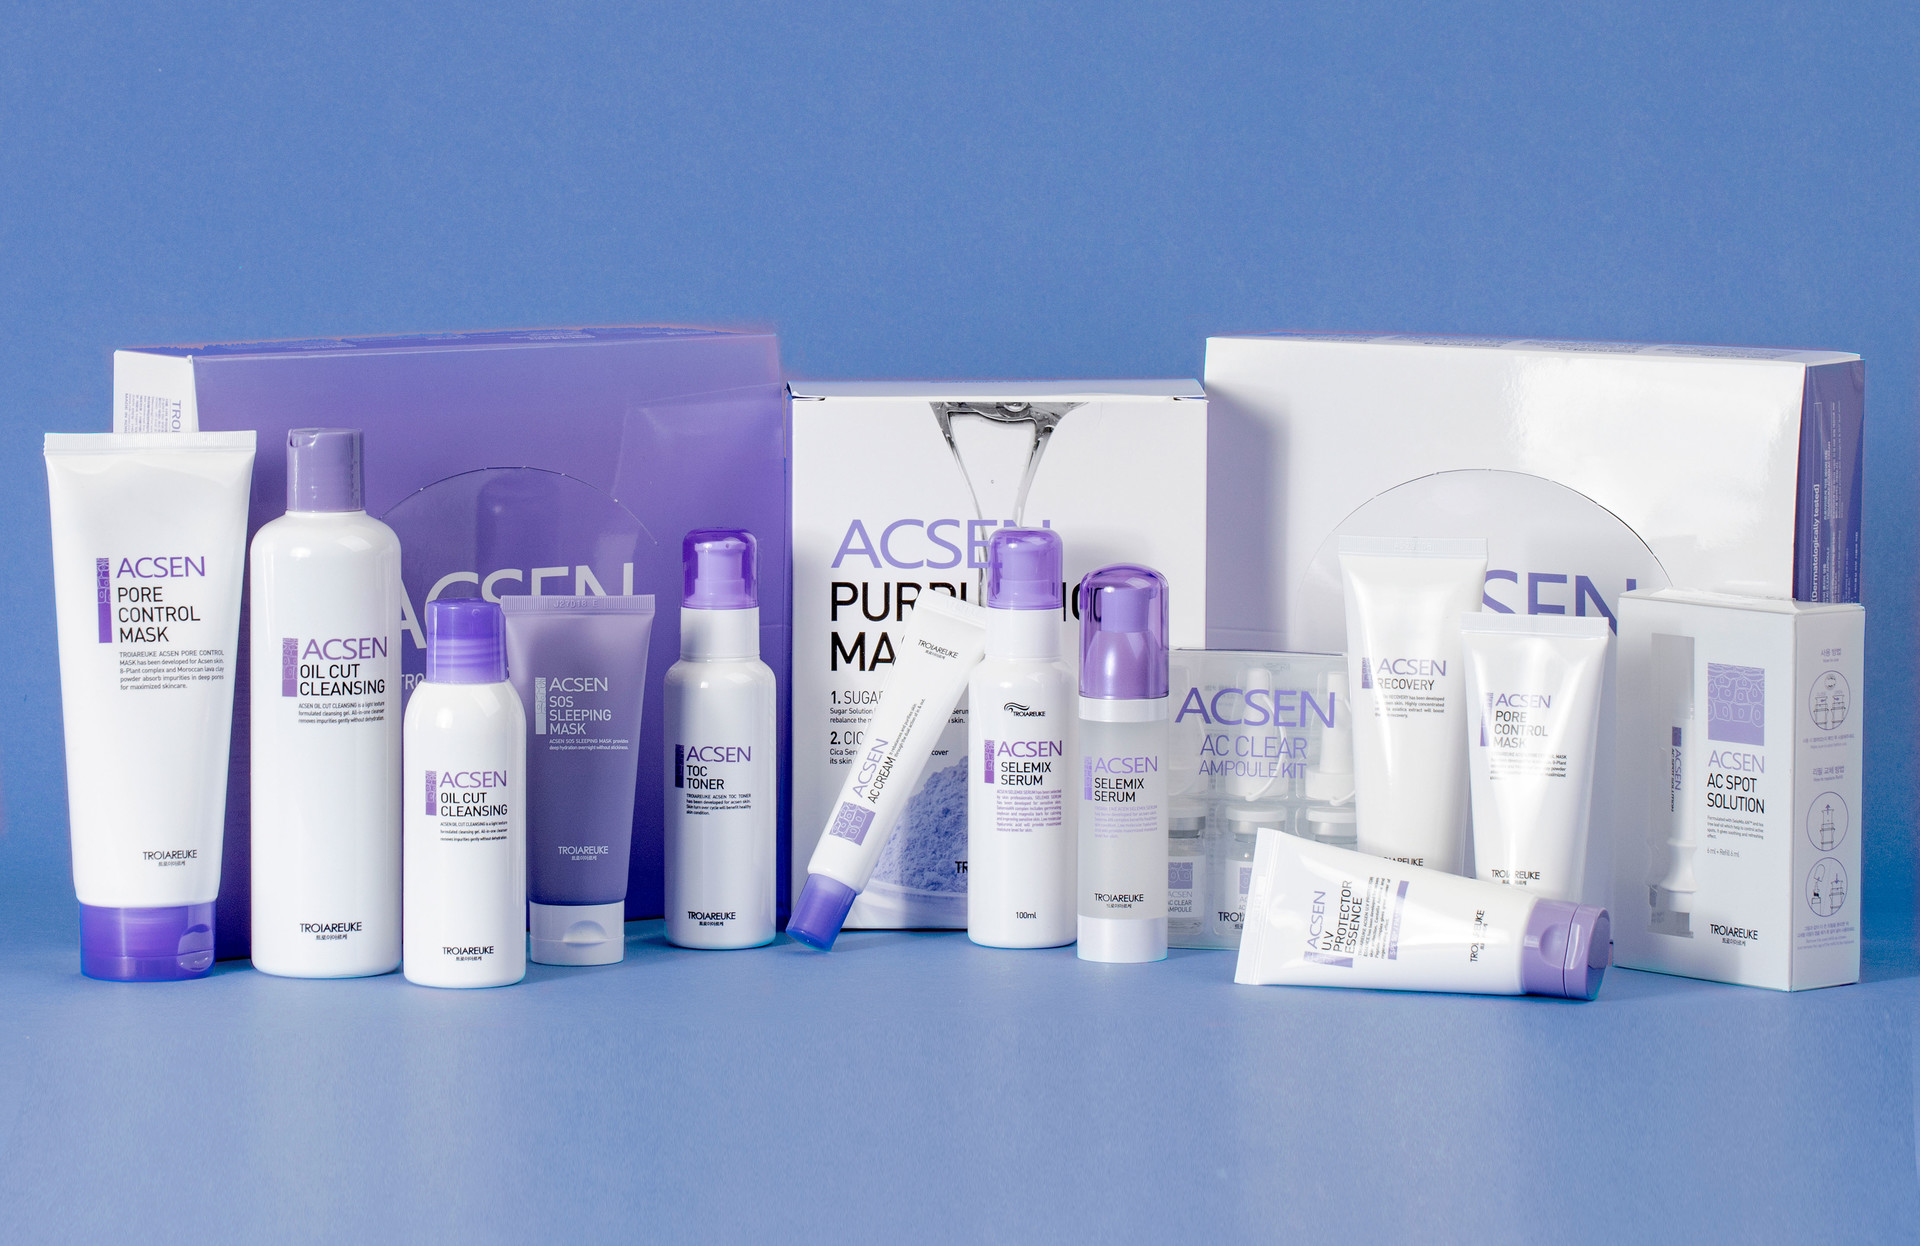 [AC]NE + [SEN]SITIVITY = ACSEN — a line specially developed for acne-prone and sensitive skin. ACSEN is a professional cosmetic line that has been studied and developed by skin specialists. Presenting a complete line for personal care, ACSEN ranges from gentle cleansing, complexion maintenance to UV protection, soothing and safe for skin with acne and sensitivity.